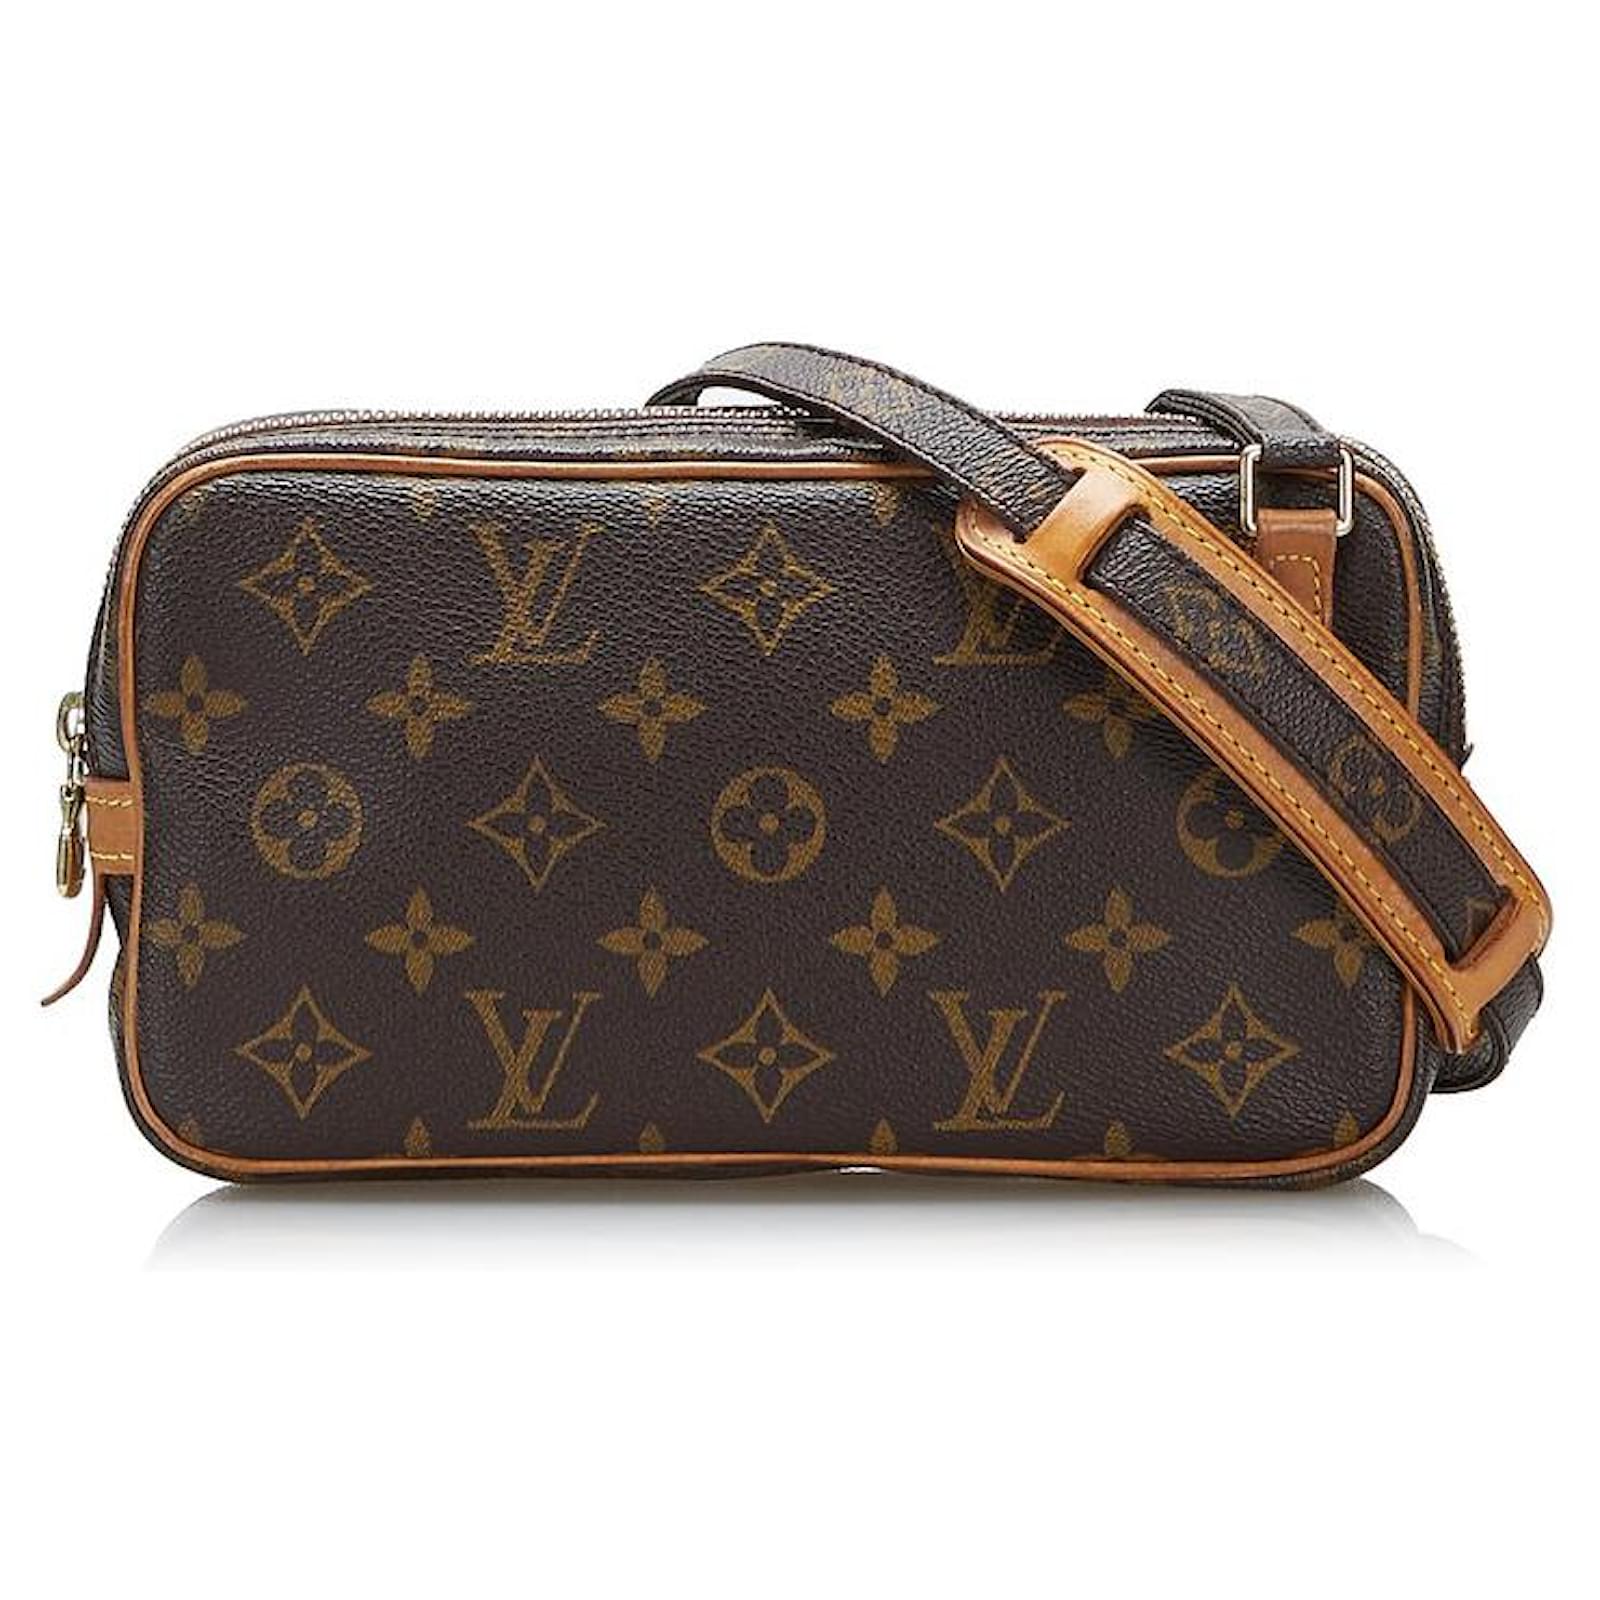 lv marly bandouliere